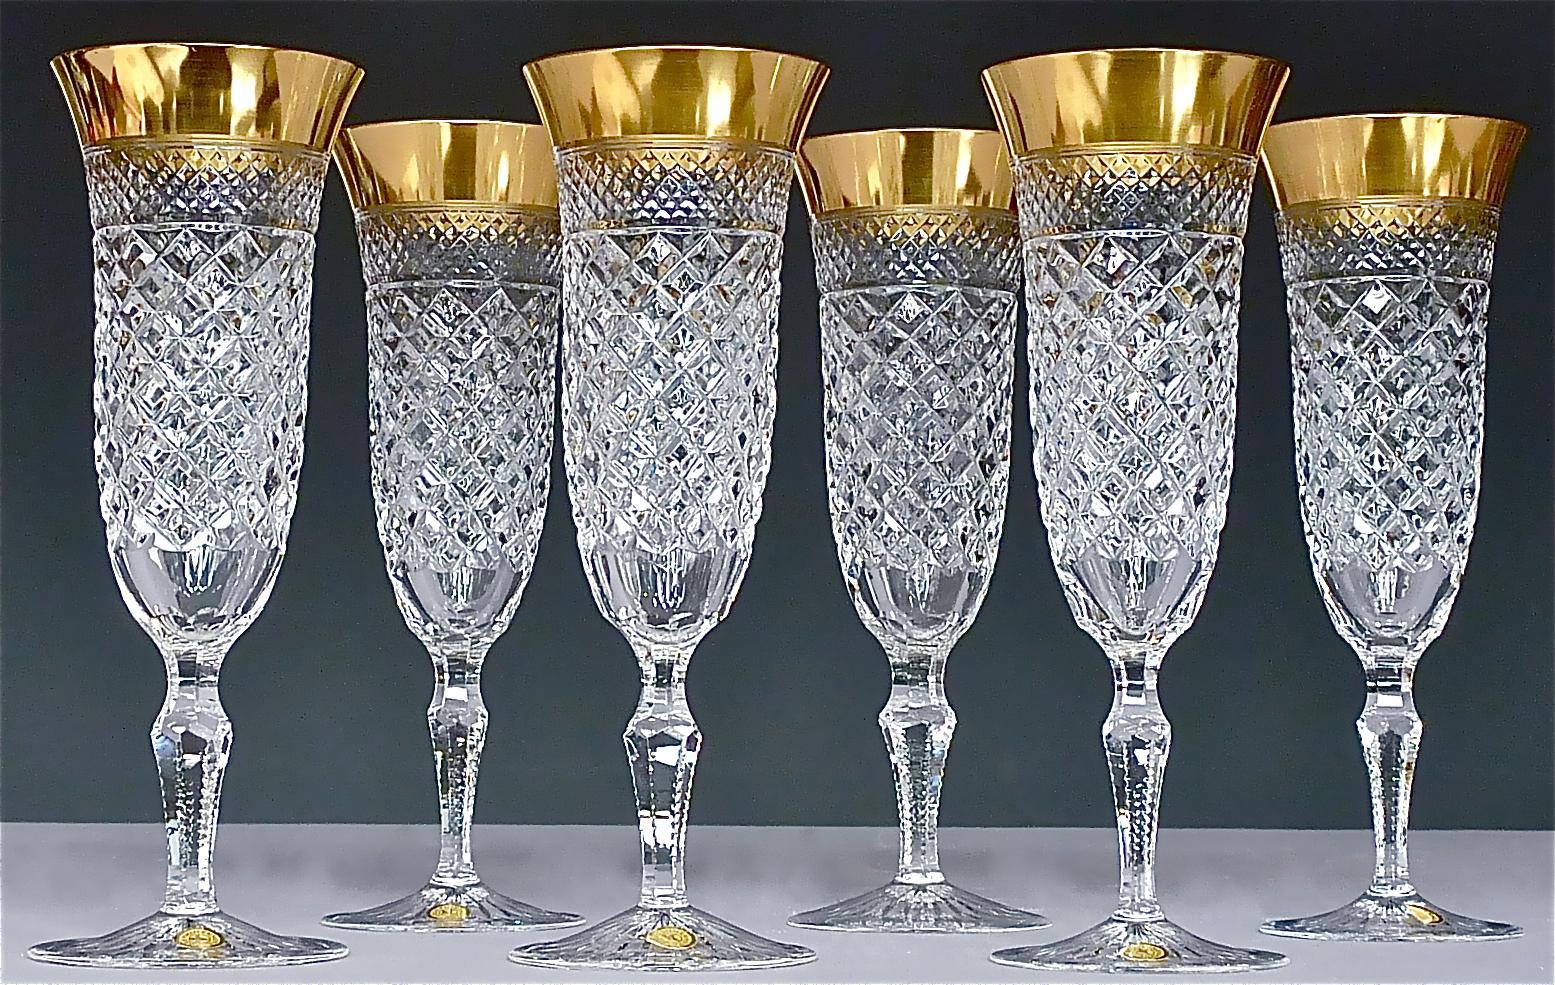 Gorgeous 20th century hand-crafted faceted crystal glass set with 24 carat gold rim made by Josephinenhuette Moser around 1960-70 and very in the style of the exclusive french company Baccarat or Saint Louis thistle. This set of 24 pieces comprises